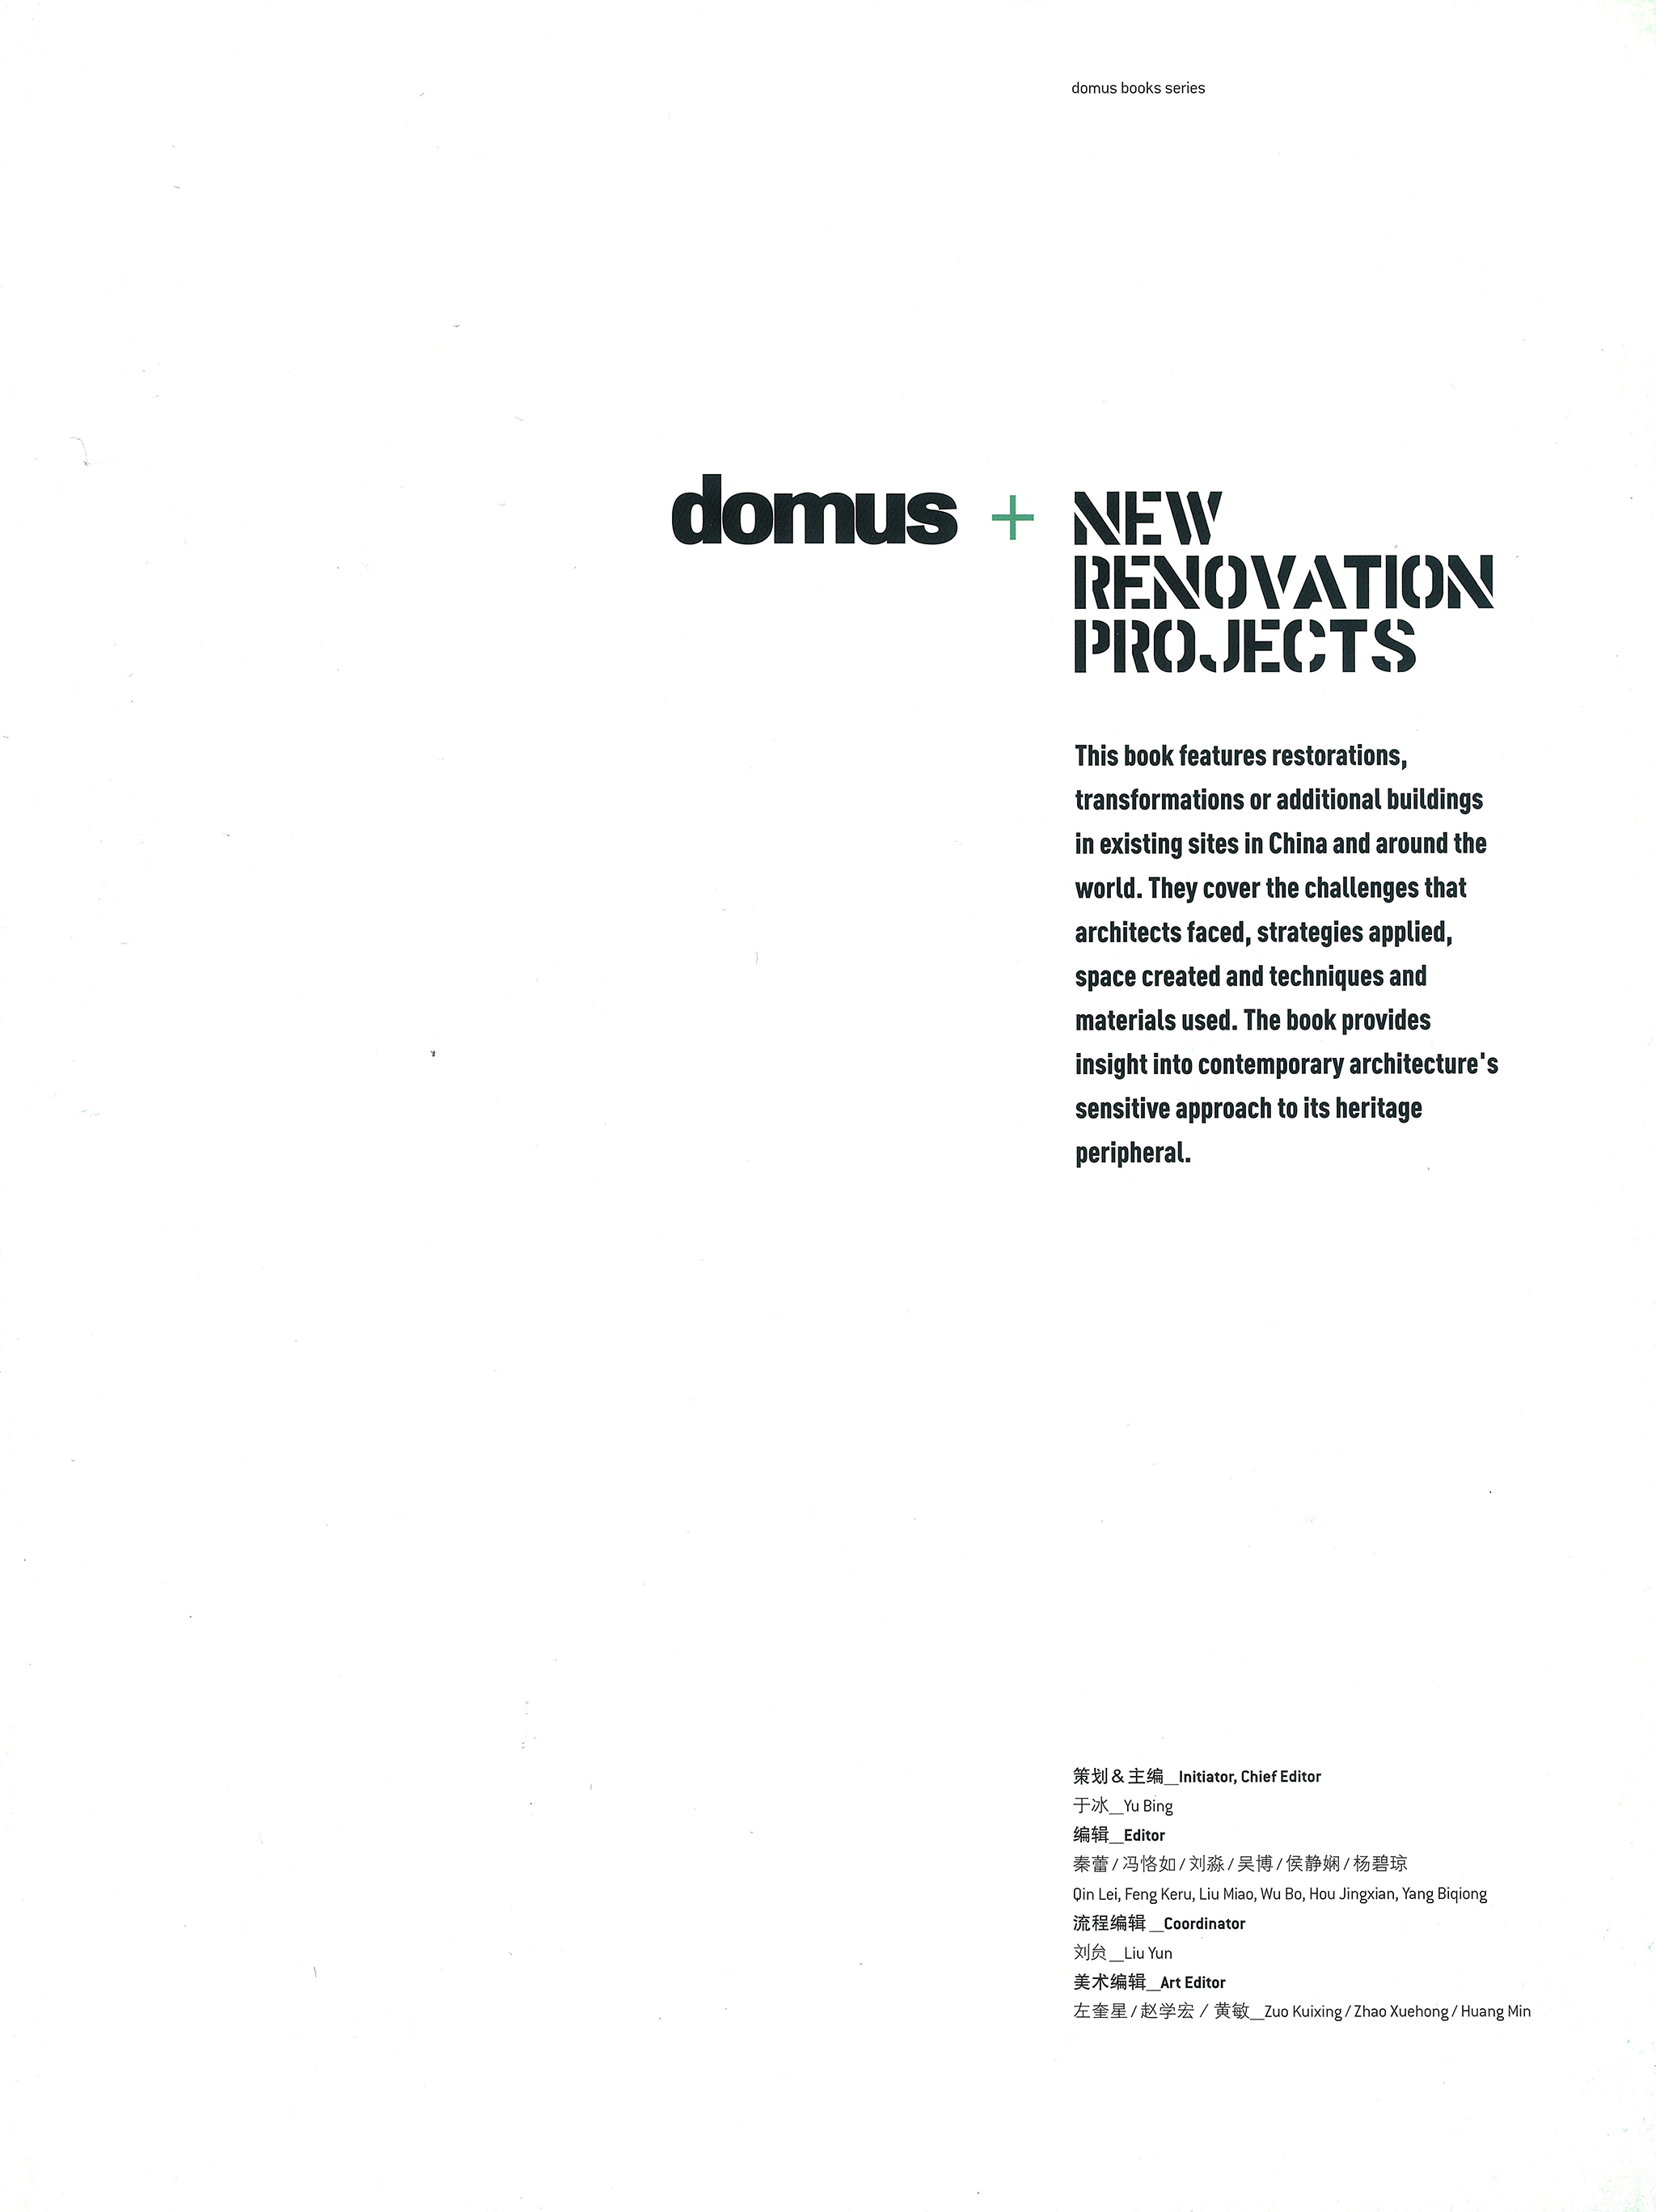 DOMUS + NEW RENOVATION PROJECTS